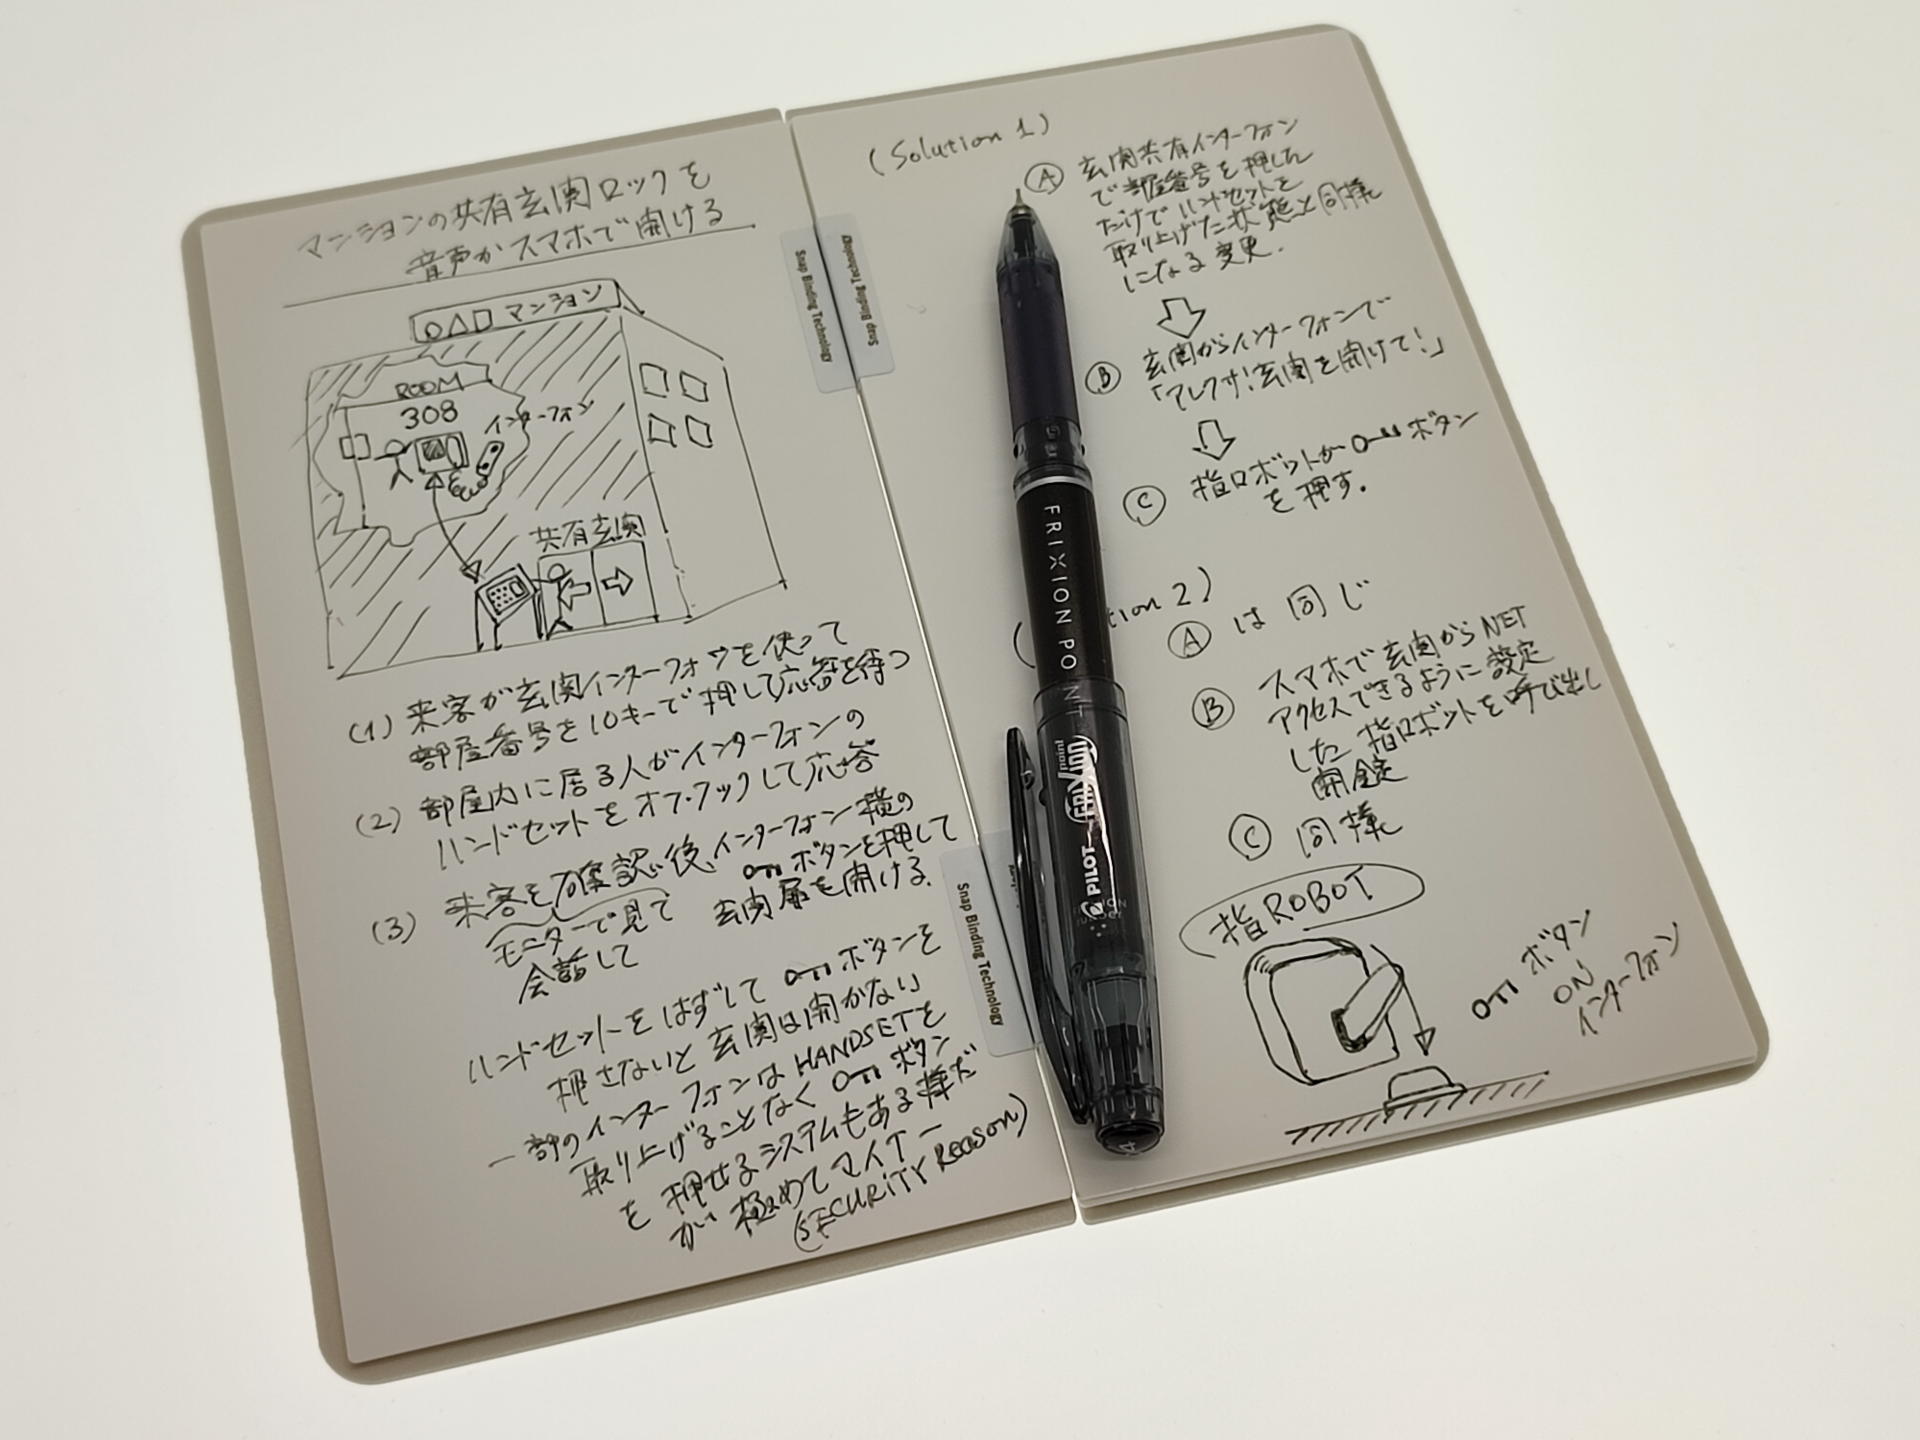 BUTTERFLY BOARD Notes」っていう令和のホワイトボードを友人から頂い 